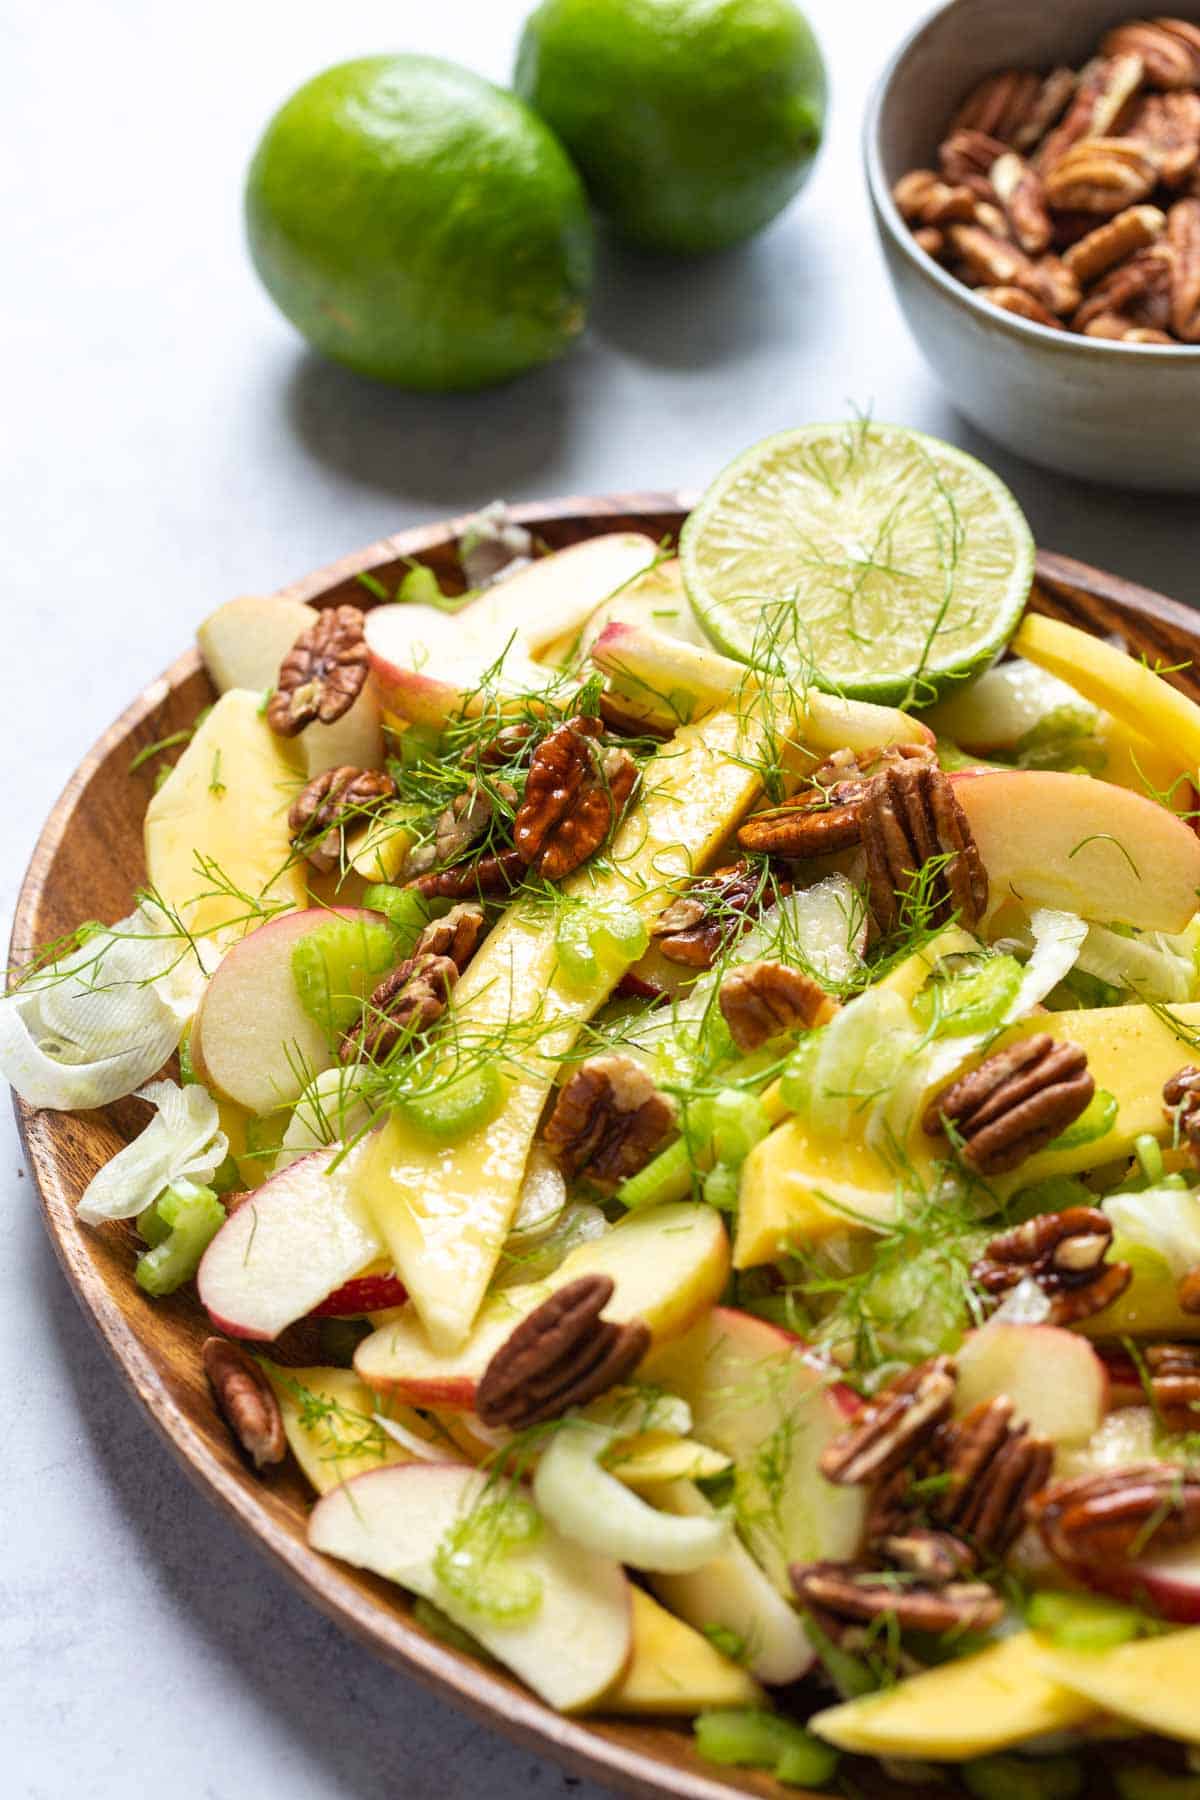 A plate of fruit salad with pecans and limes, accompanied by a refreshing celery salad.